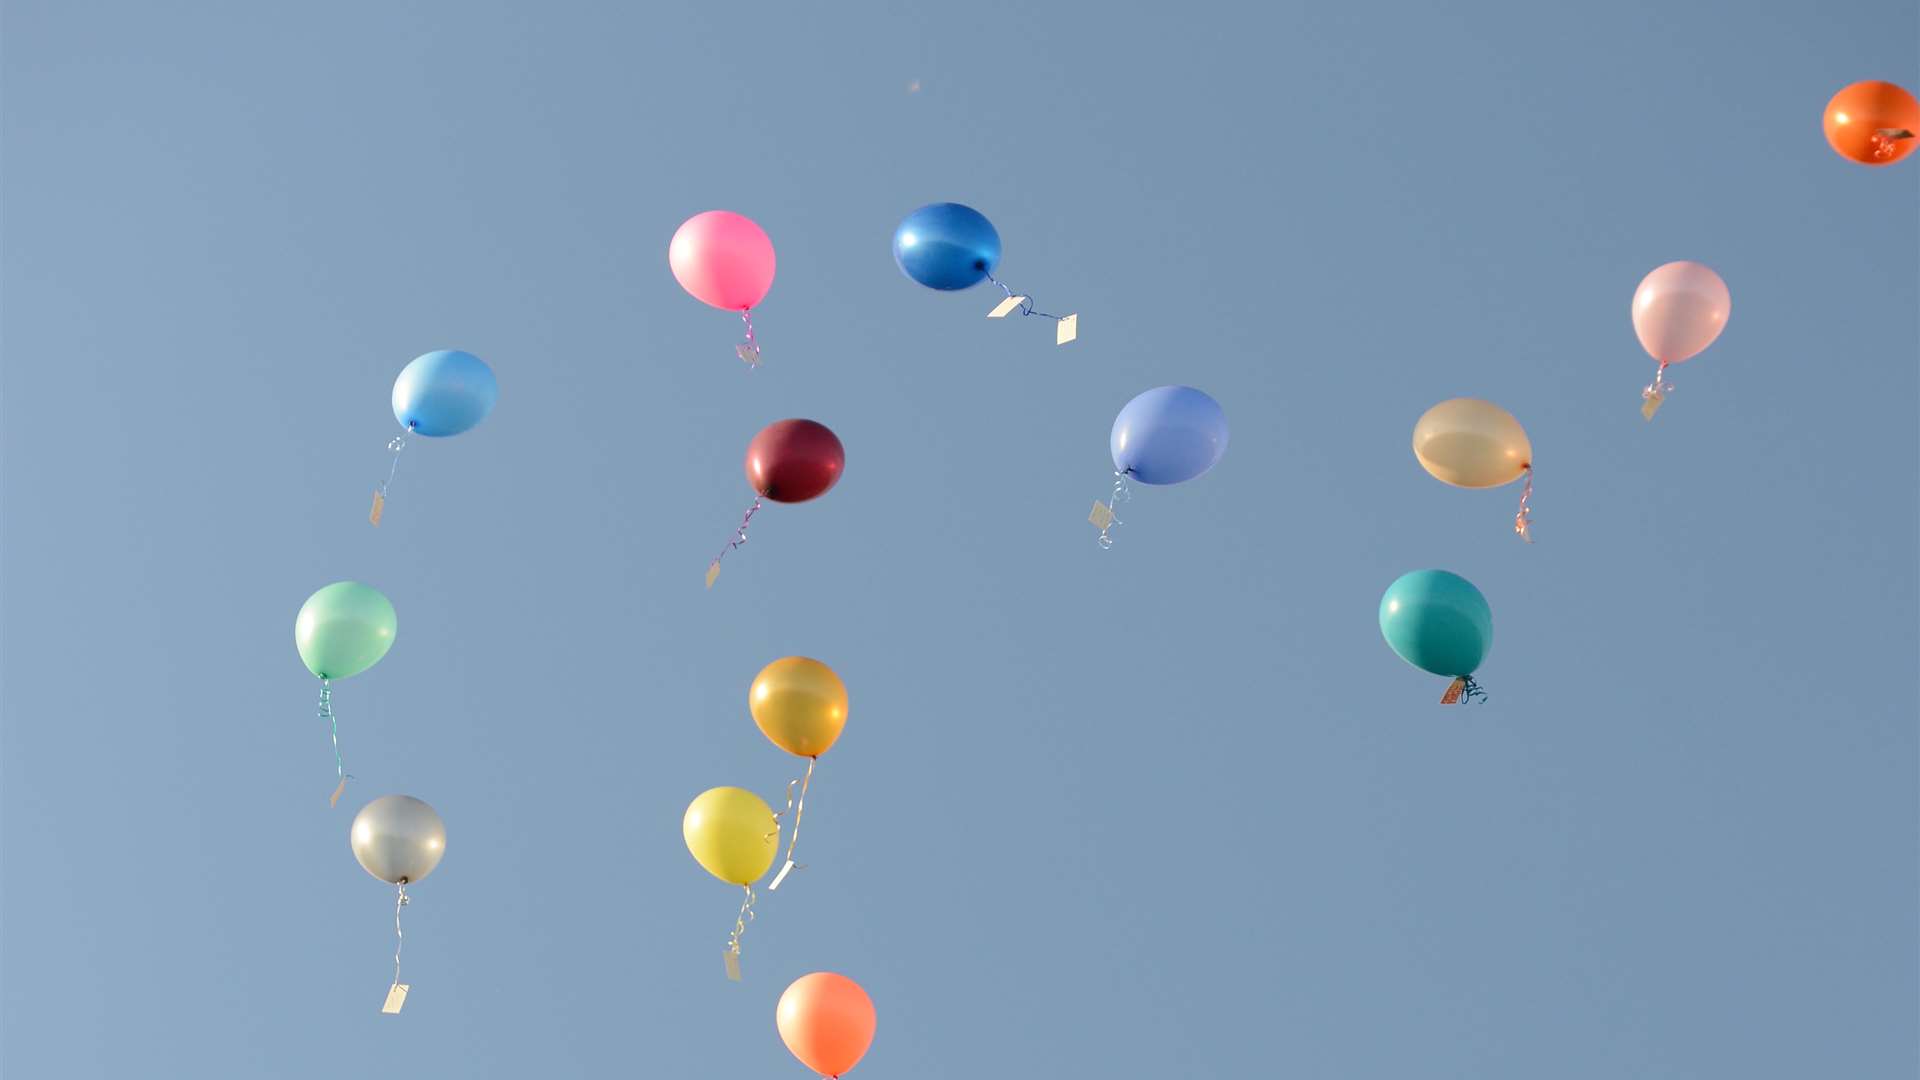 Canterbury has banned the release of balloons and lanterns after complaints